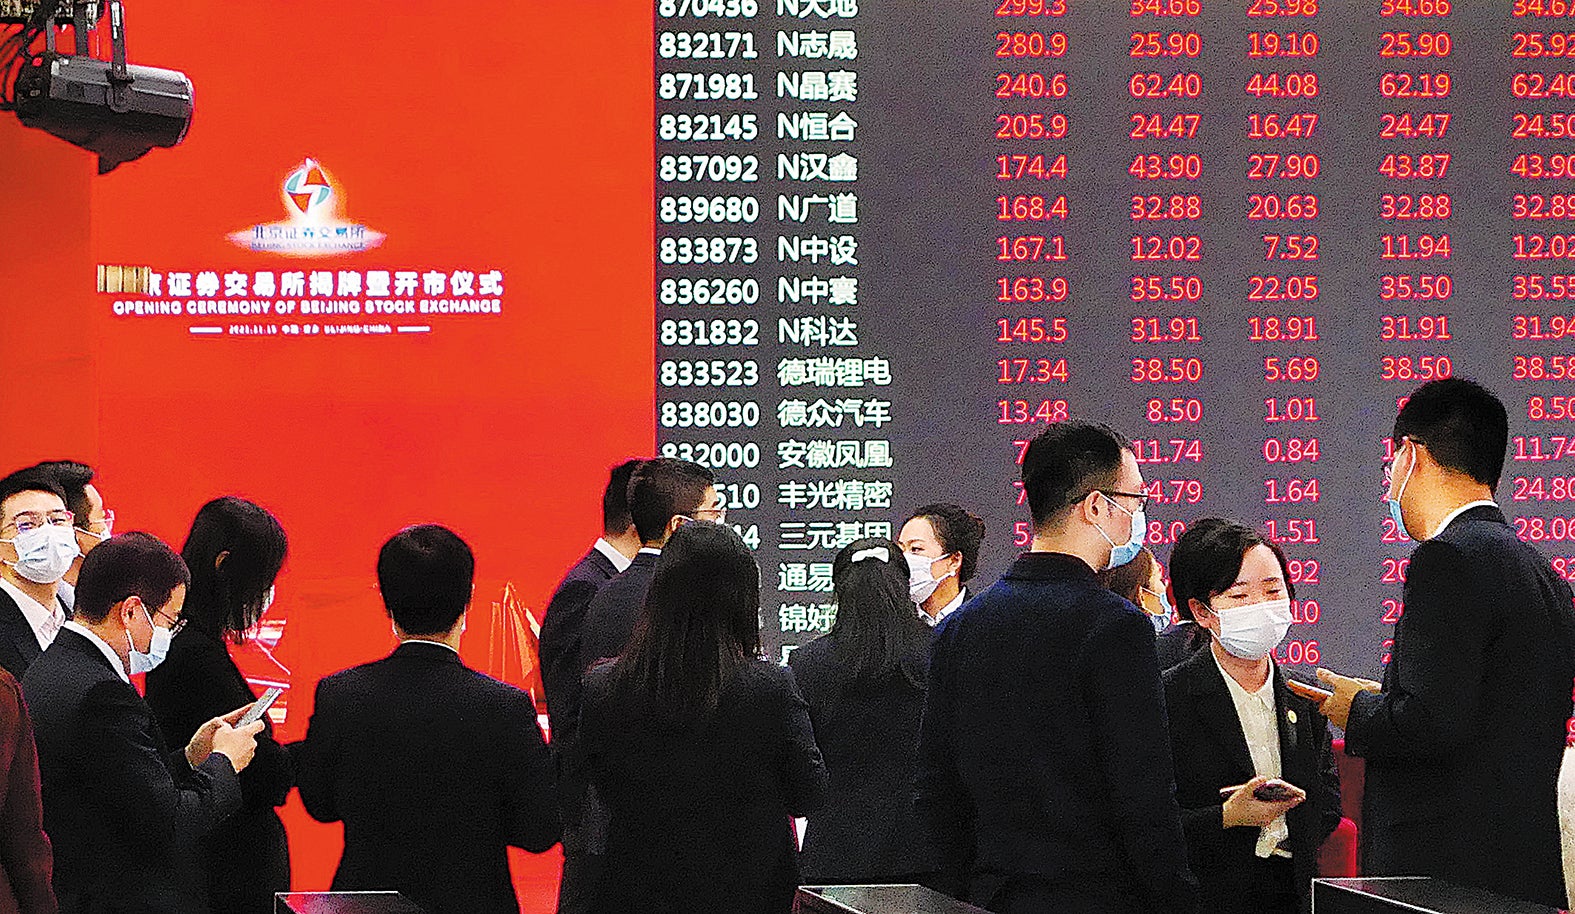 The Beijing Stock Exchange opened for business on November 15, providing a new financing channel for many small and medium-sized enterprises in China